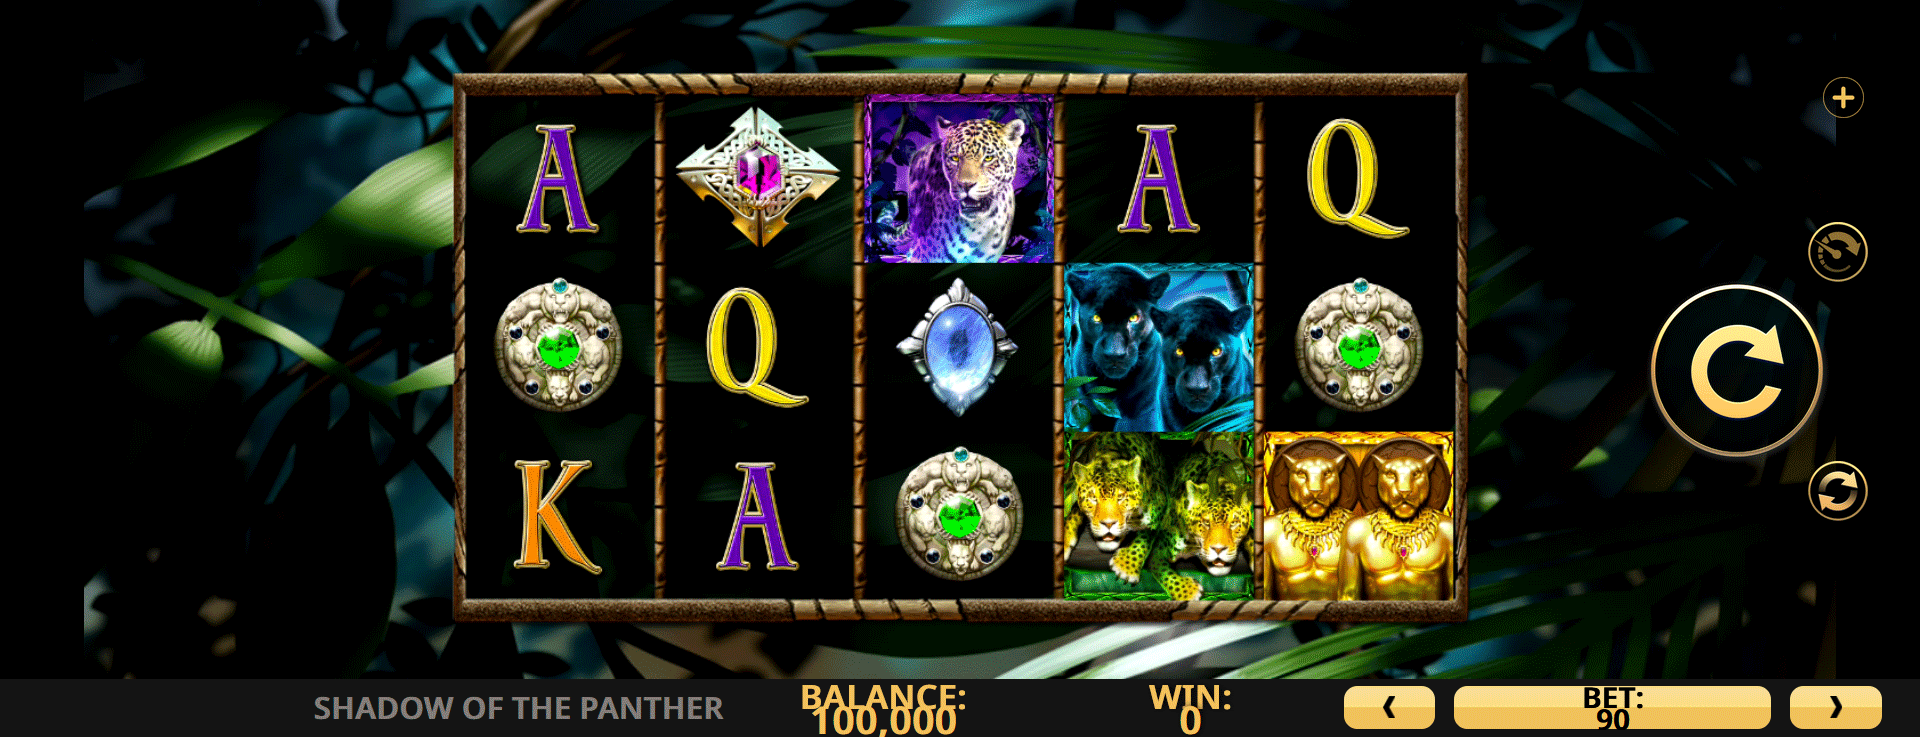 schermata del gioco slot online shadow of the panther